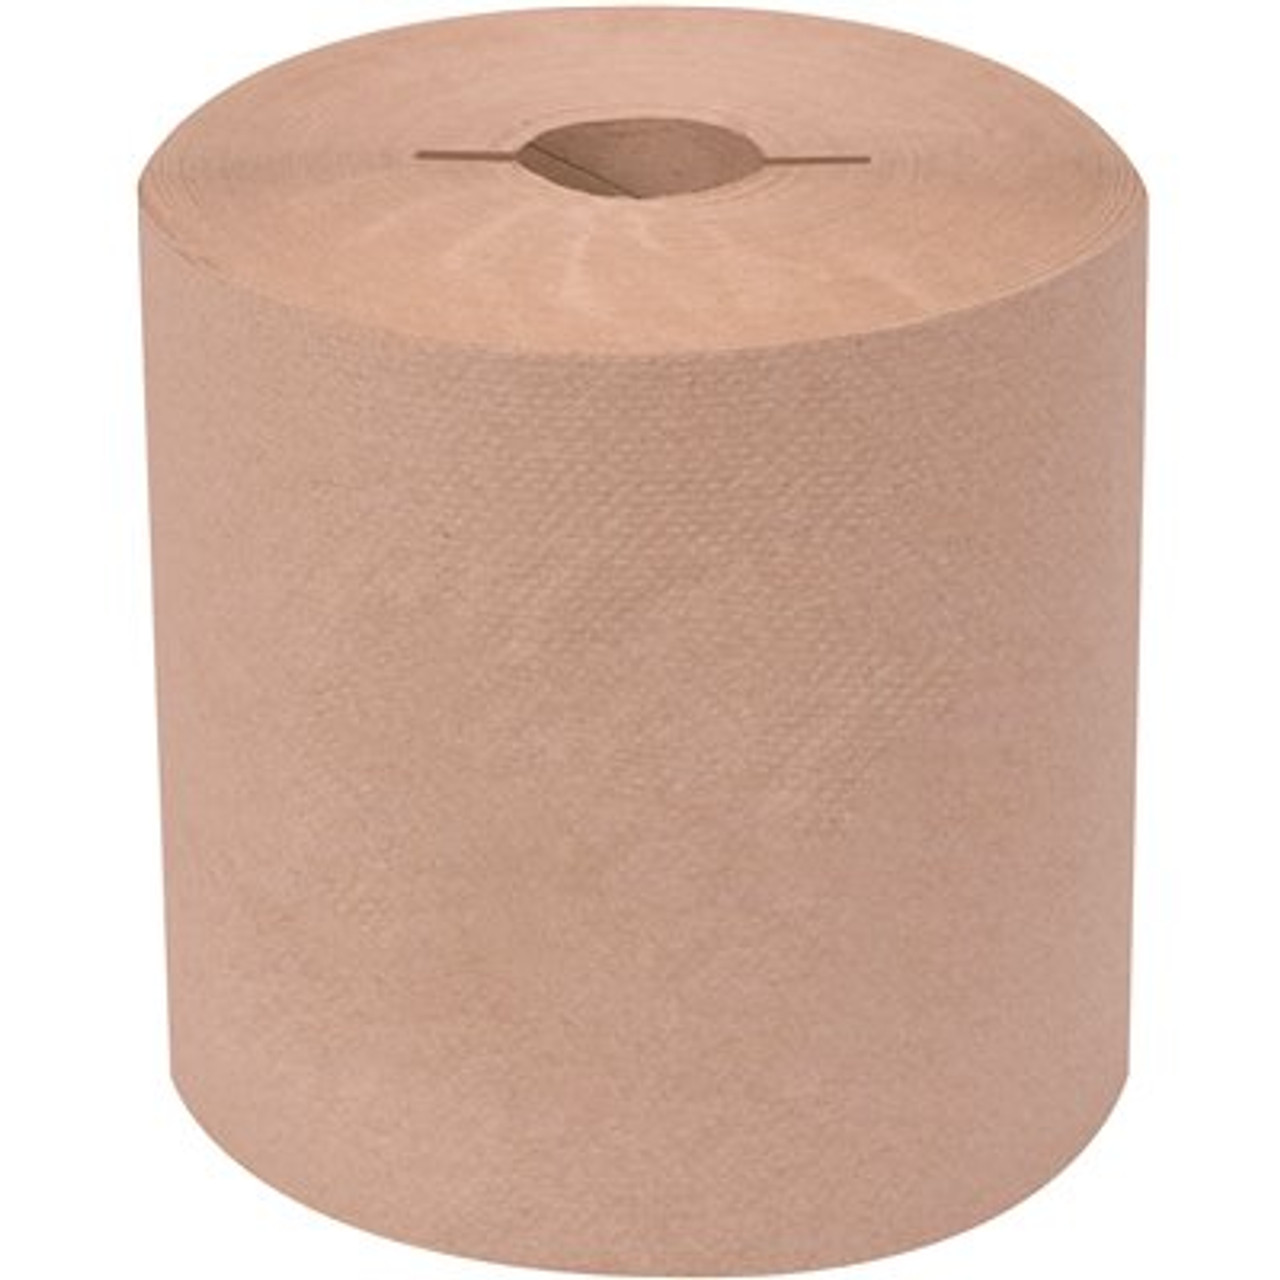 Renown Natural 7.5 in. Controlled Hardwound Paper Towels (800 ft. per Roll, 6-Rolls per Case)